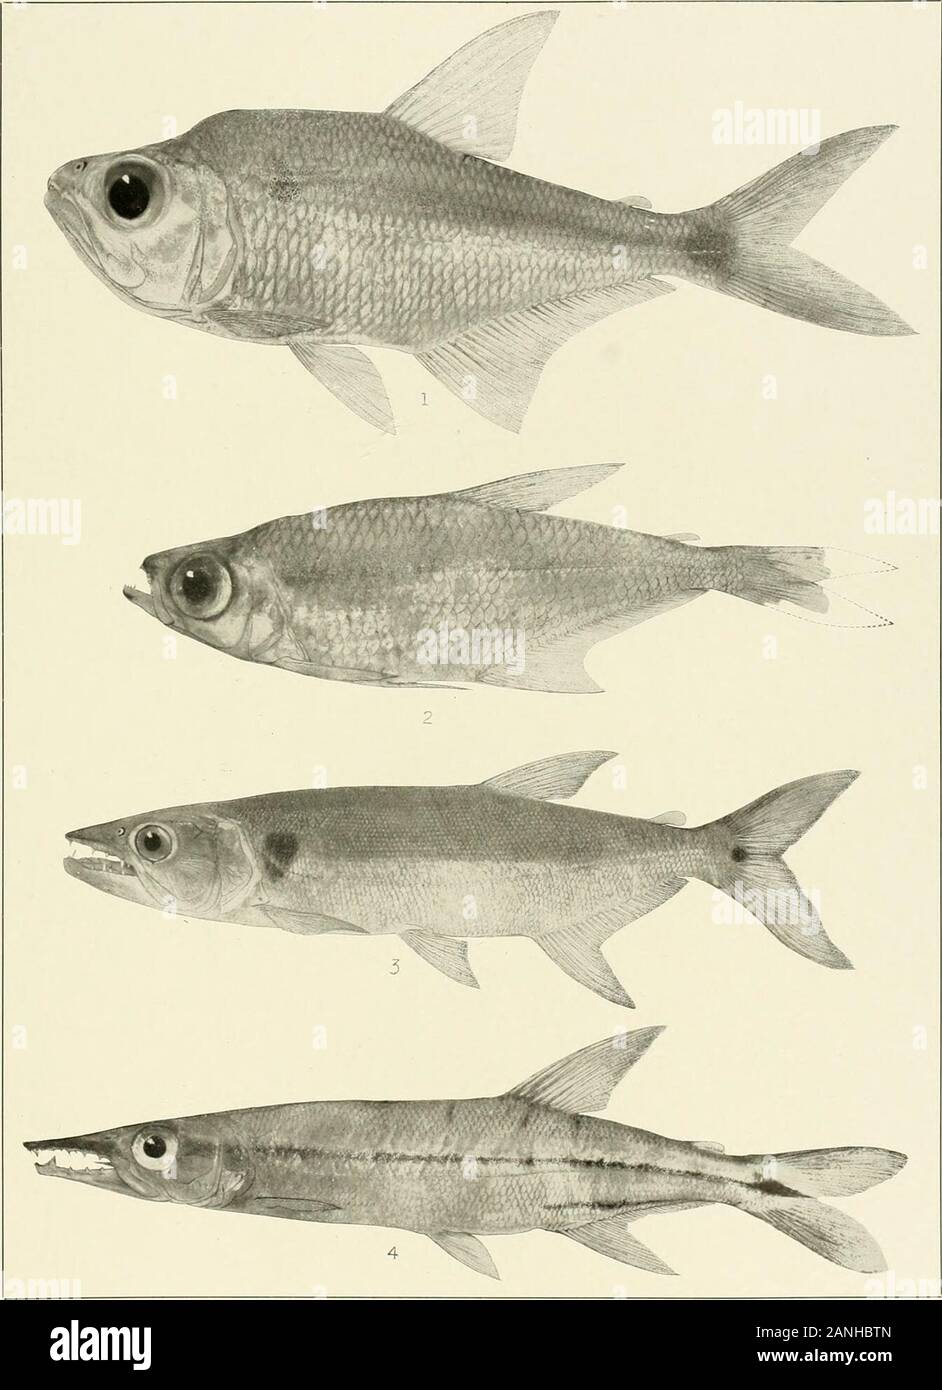 The freshwater fishes of British Guiana, including a study of the ecological grouping of species and the relation of the fauna of the plateau to that of the lowlands . 1. Exodon paradoxus Muller and Troschel. 75 mm. No. 214.5. 2. Rceboides thurni Eicenmann.(Type.) 104mm. No.2149. 3. Charaxgibbosus(Linn^us). 87mm. No.2130. 4. Asiphonichlhys hemi-grammus Eigenmann. (Type.) 27 mm. No. 2137. Iemoirs Carnegie Museum, Vol. V. Plate LXI.. 1. AcanthocharaxmicrolepisEigenmann. (Type.) 10.) mm. No. 2138. 2. HeterocharaxmaerolepisTOiiGEN-manx. (Type.) 46 mm. No. 2142. 3. Acestrorhynchns falcatu&(Bi.och). Stock Photo